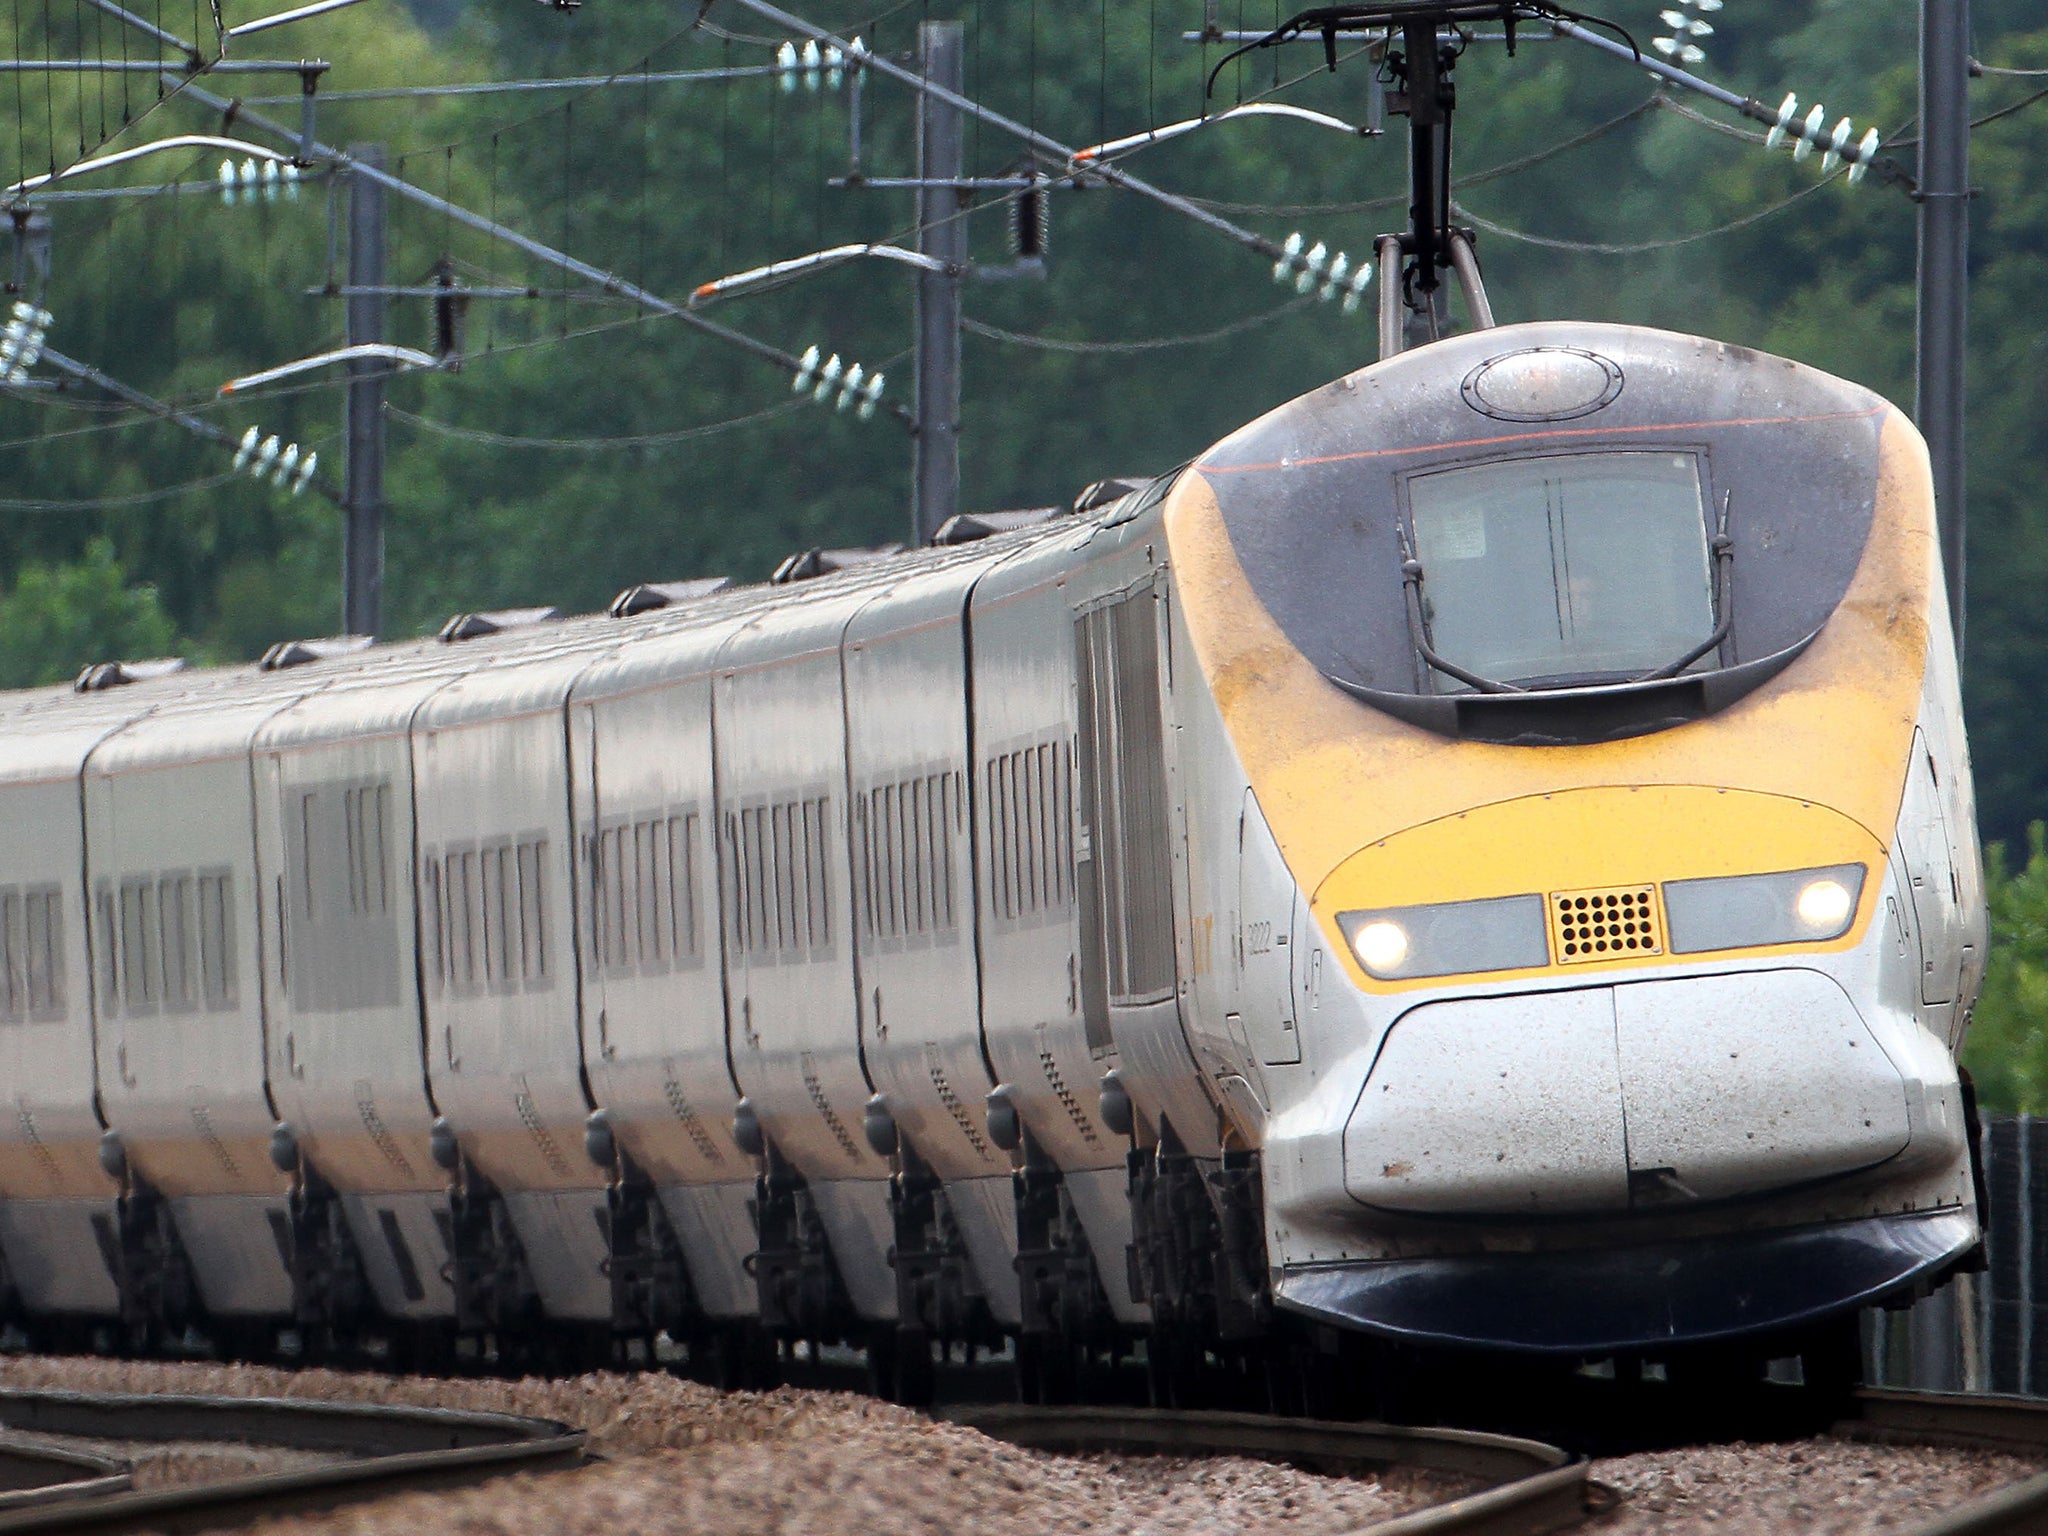 Eurostar trains have been cancelled after a person was hit by a train